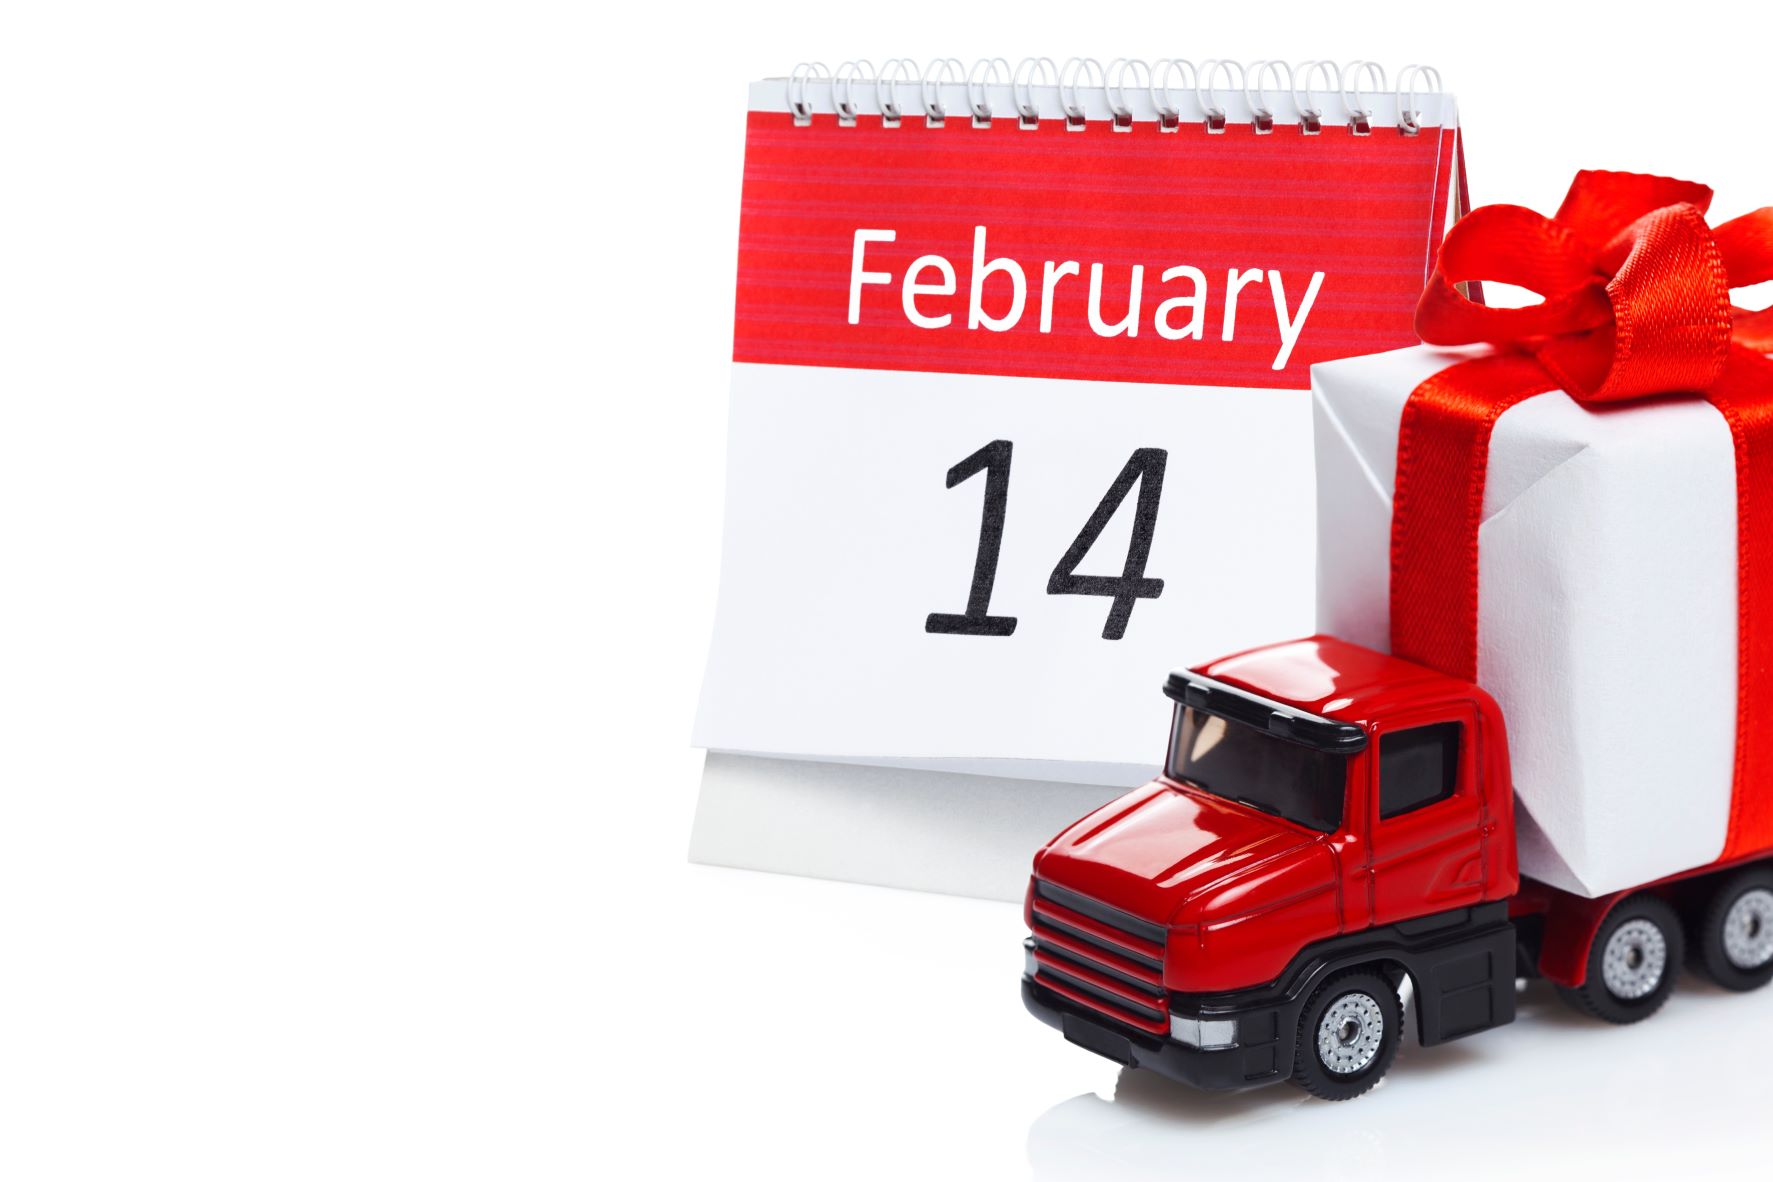 A small toy truck in front of a calendar that says February 14